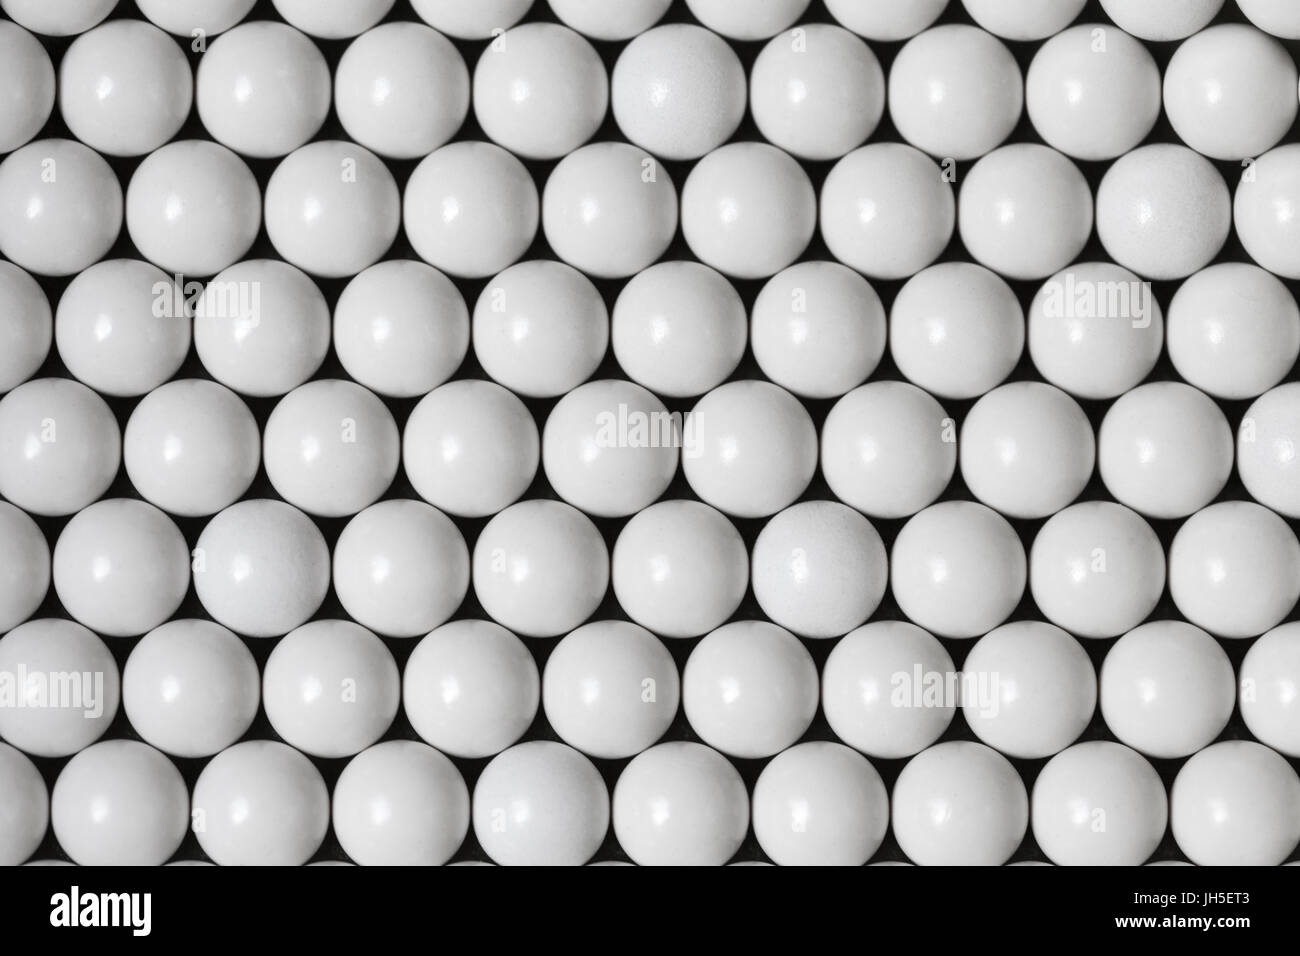 Airsoft pellets background Stock Photo